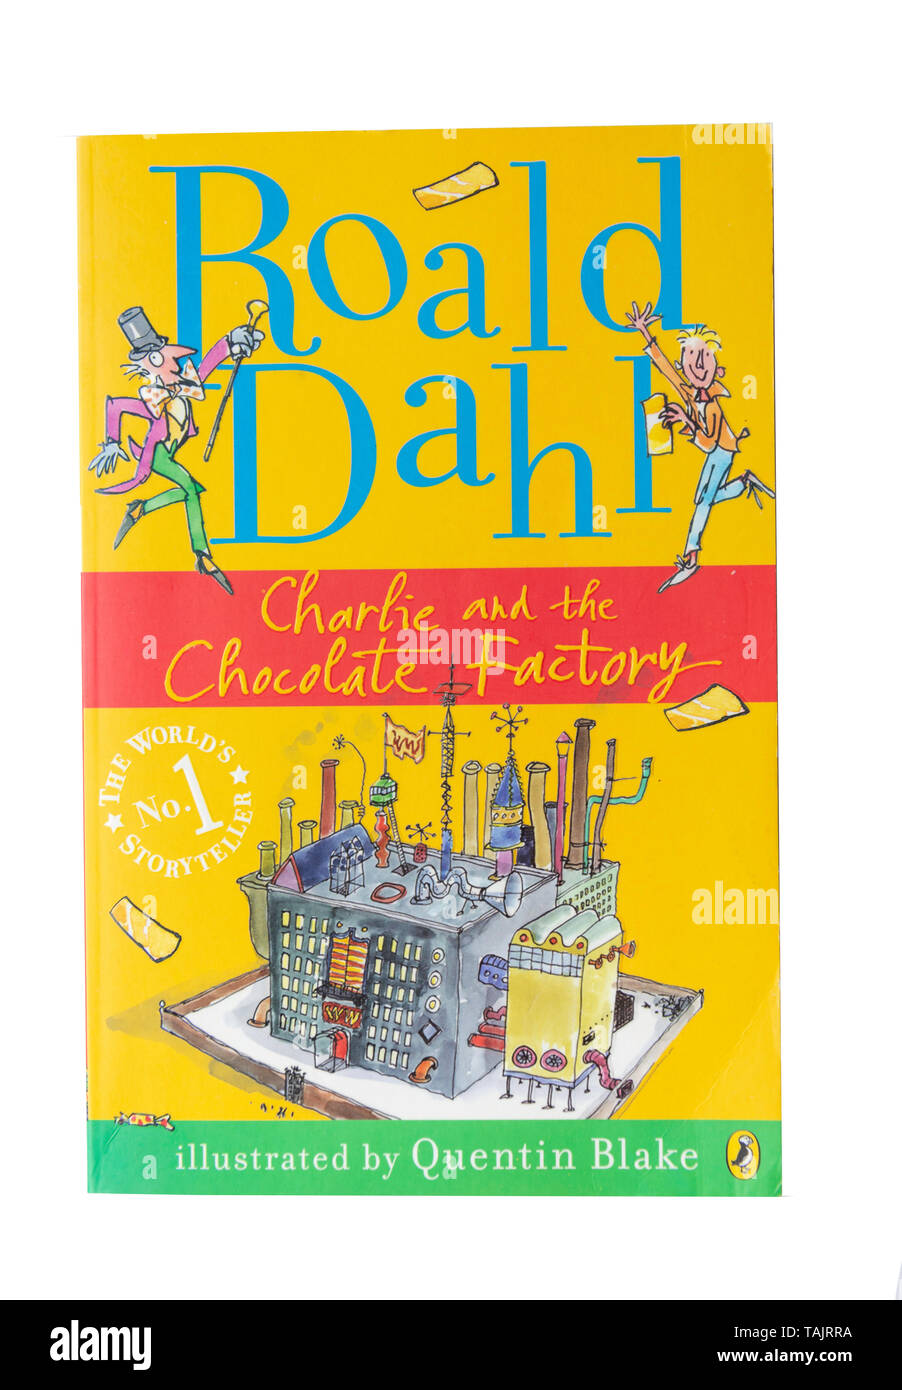 Roald Dahl's 'Charlie and the Chocolate Factory' children's book, Greater London, England, United Kingdom Stock Photo